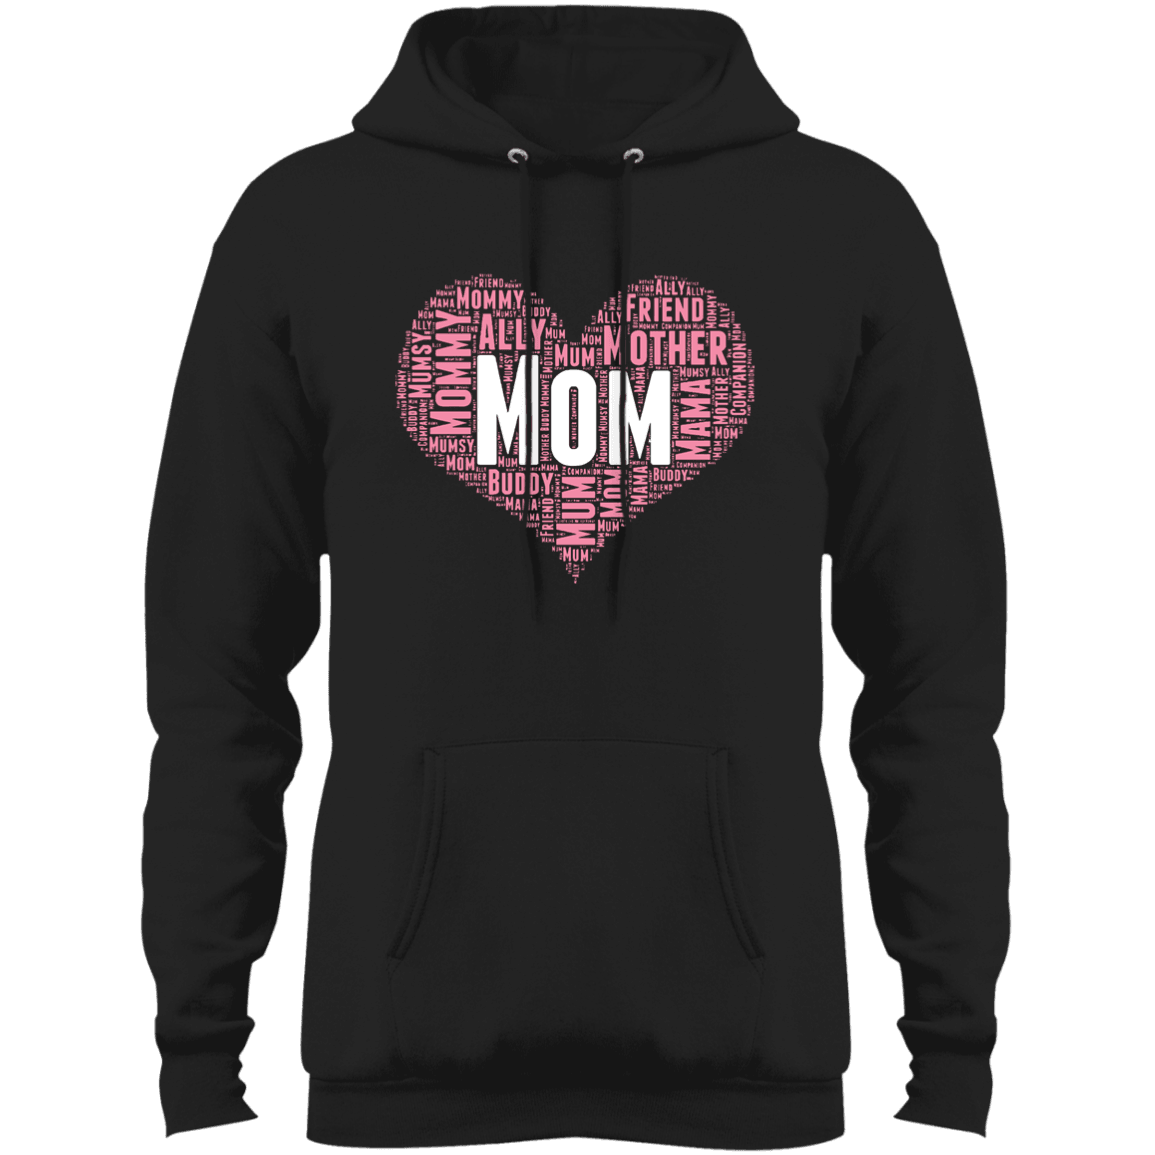 Designs by MyUtopia Shout Out:All the Ways Mom is Special in Your Heart Core Fleece Pullover Hoodie,Jet Black / S,Sweatshirts